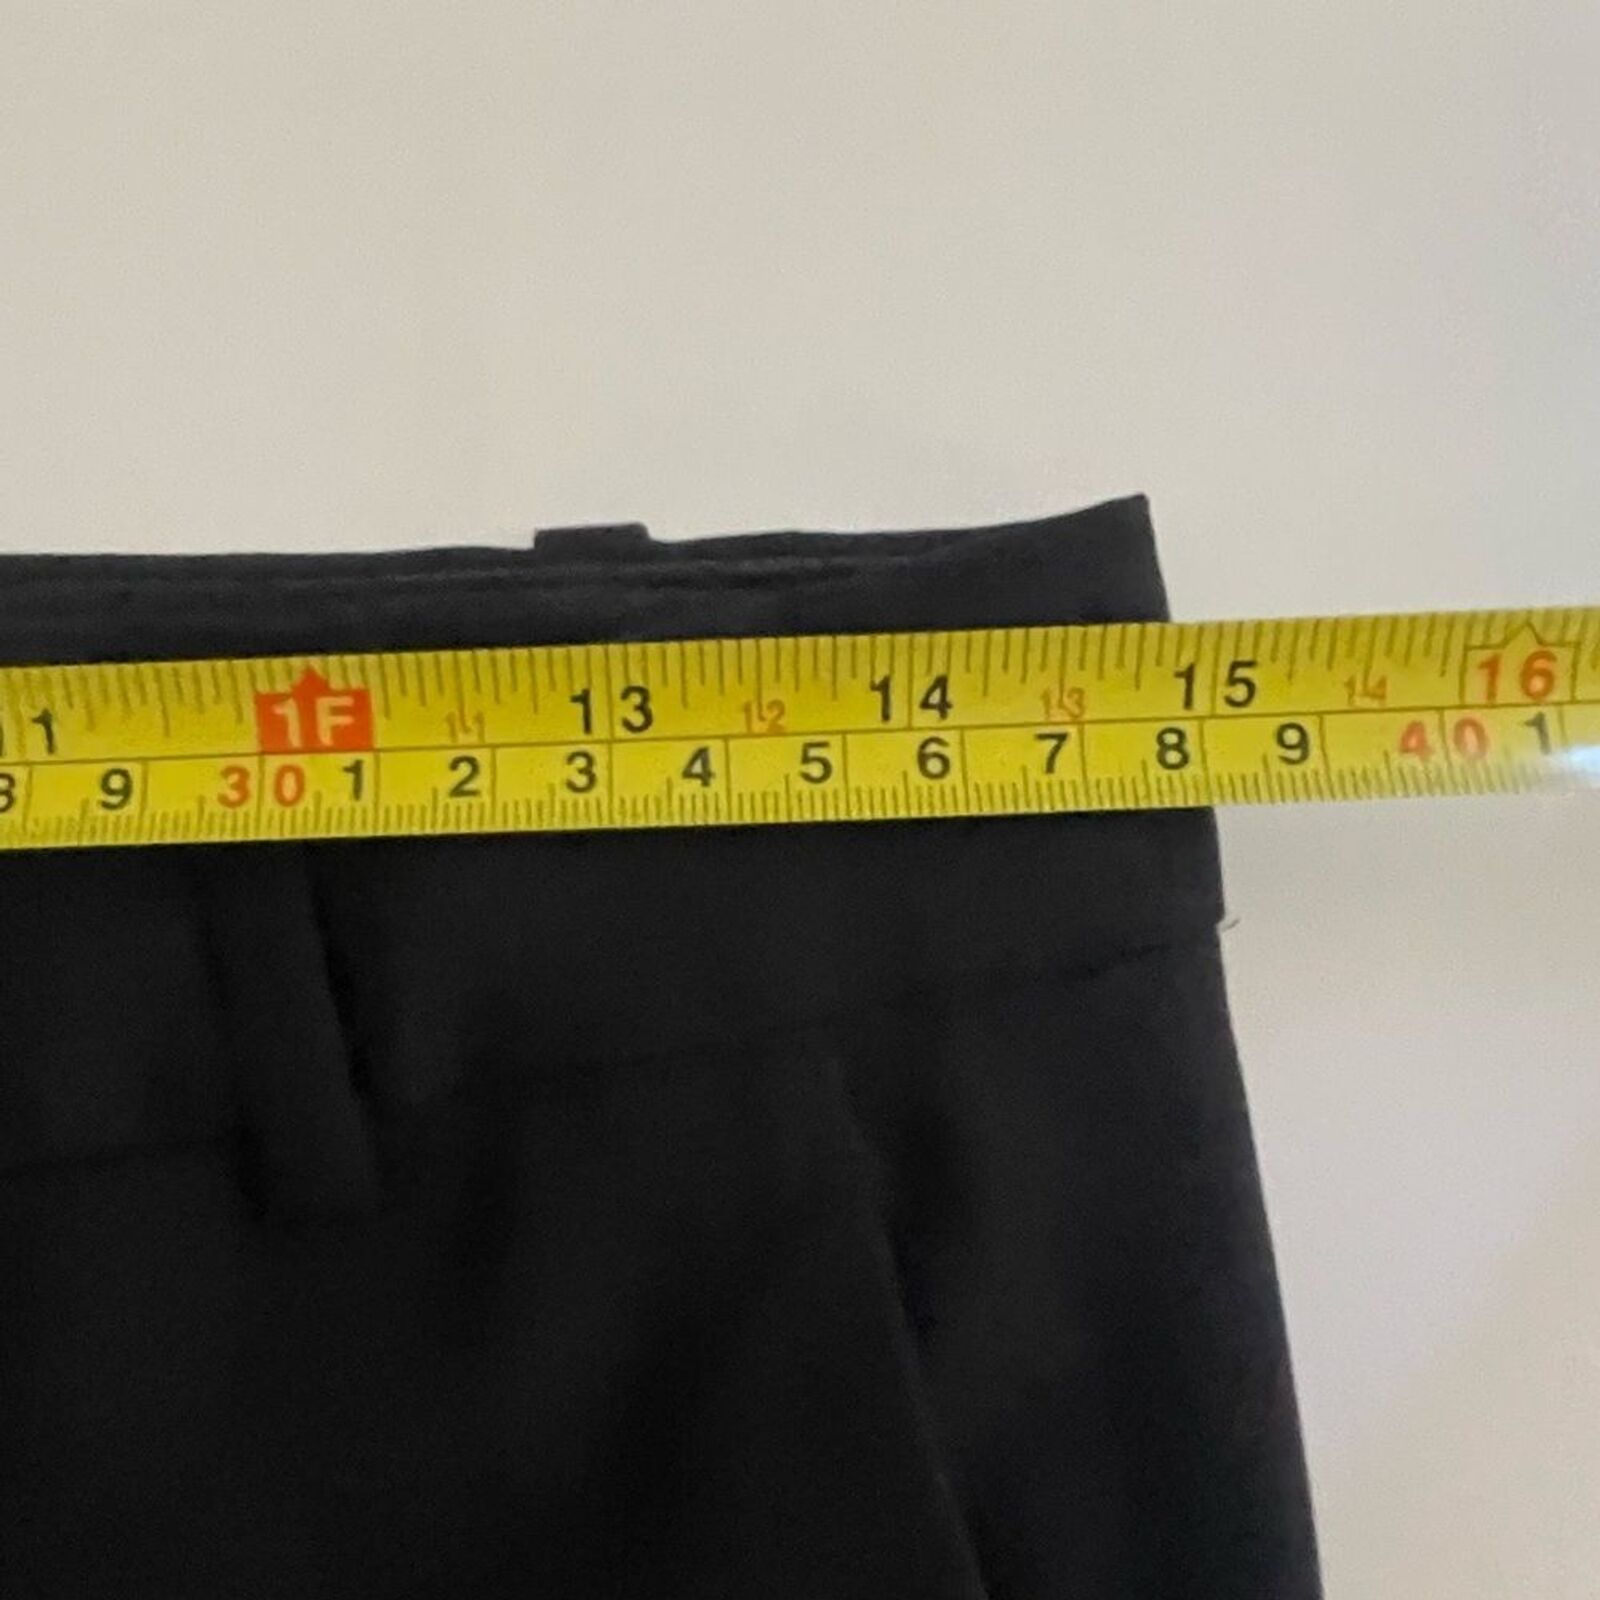 Theory Emery 2 Trousers Size 2 - image 9